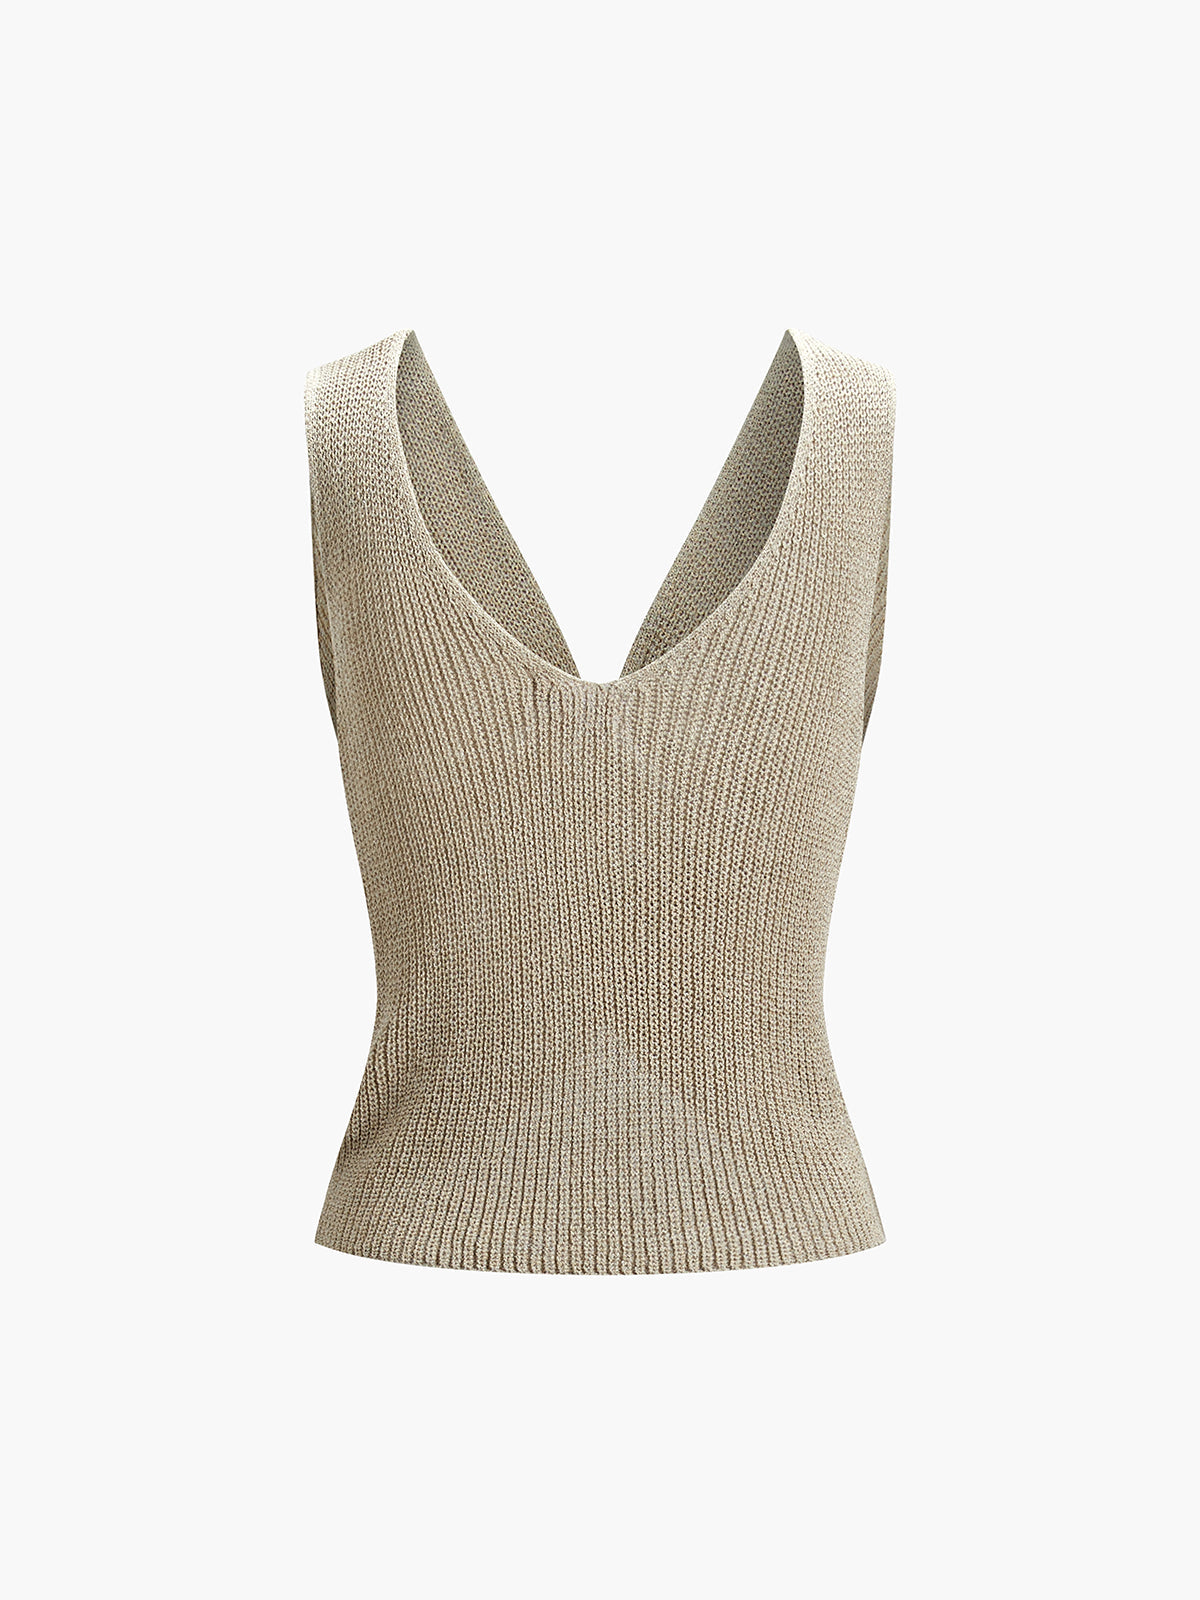 Utility Knotted Knit Top